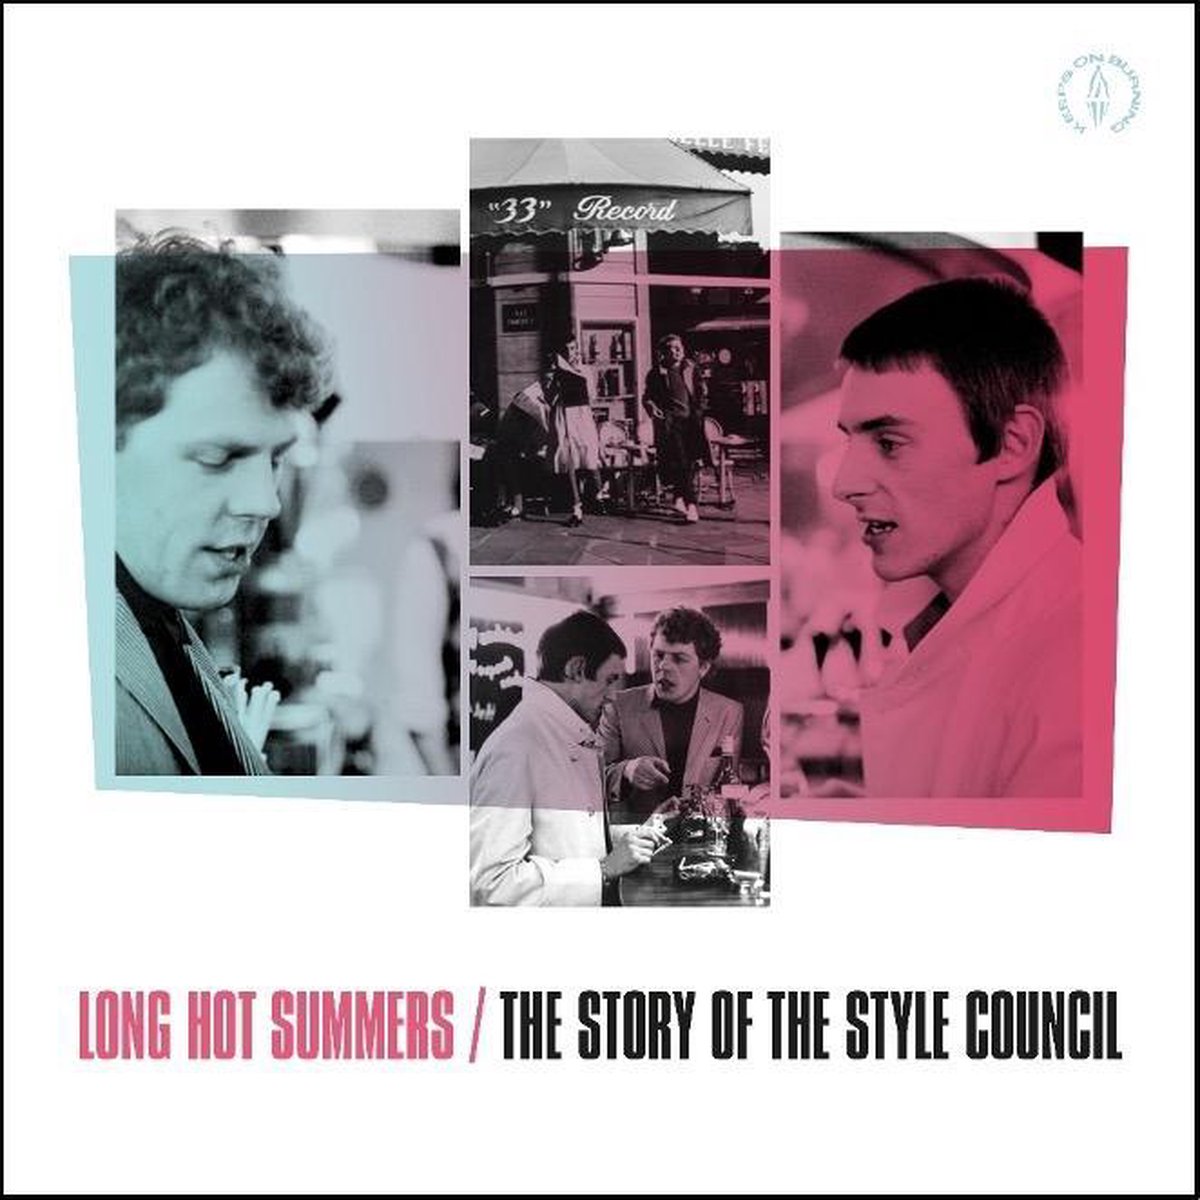 story of the style council